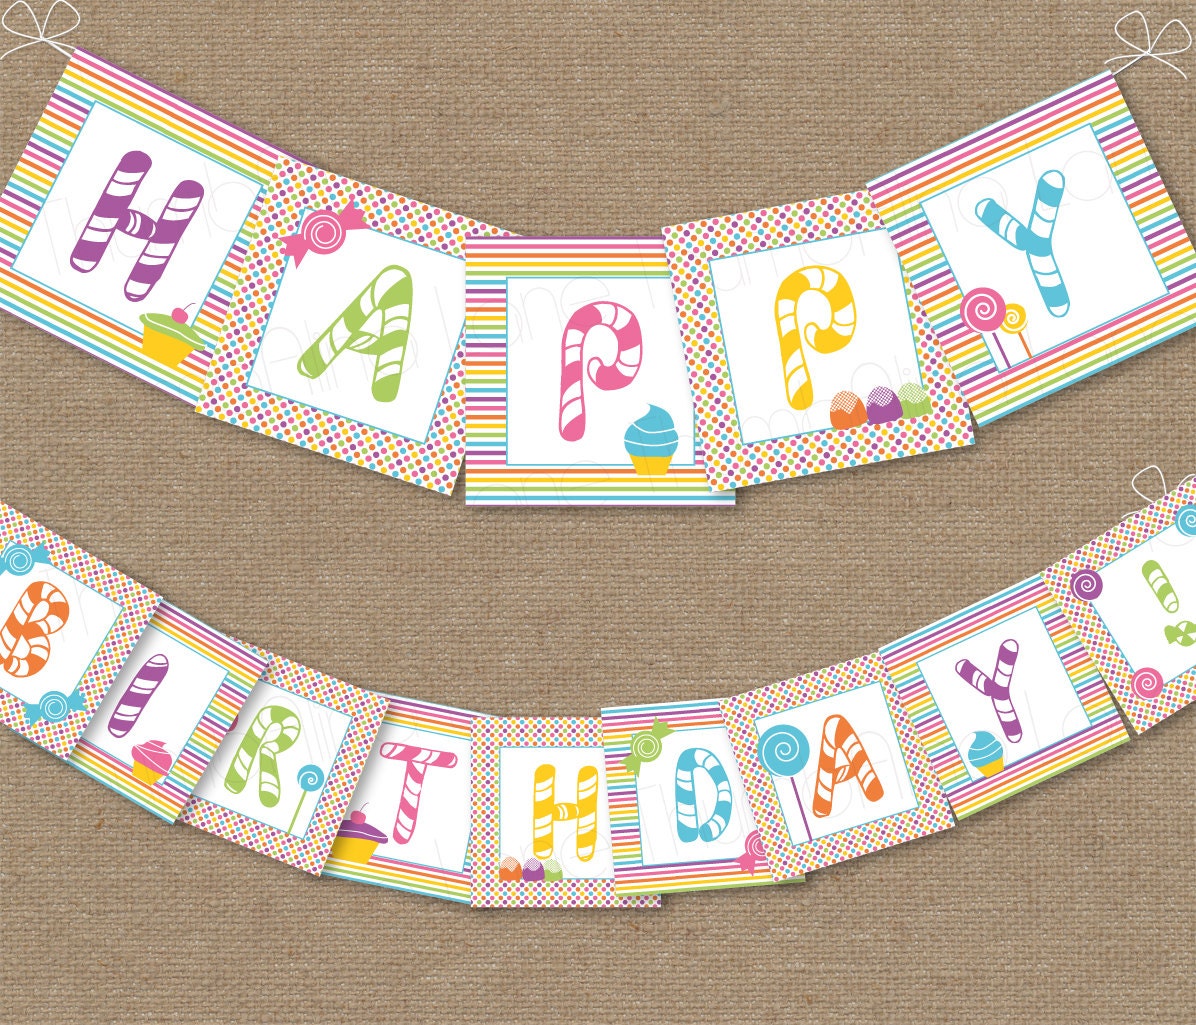 Sweet Shop Candy Land Printable Happy Birthday Party Banner Instant Download DIY